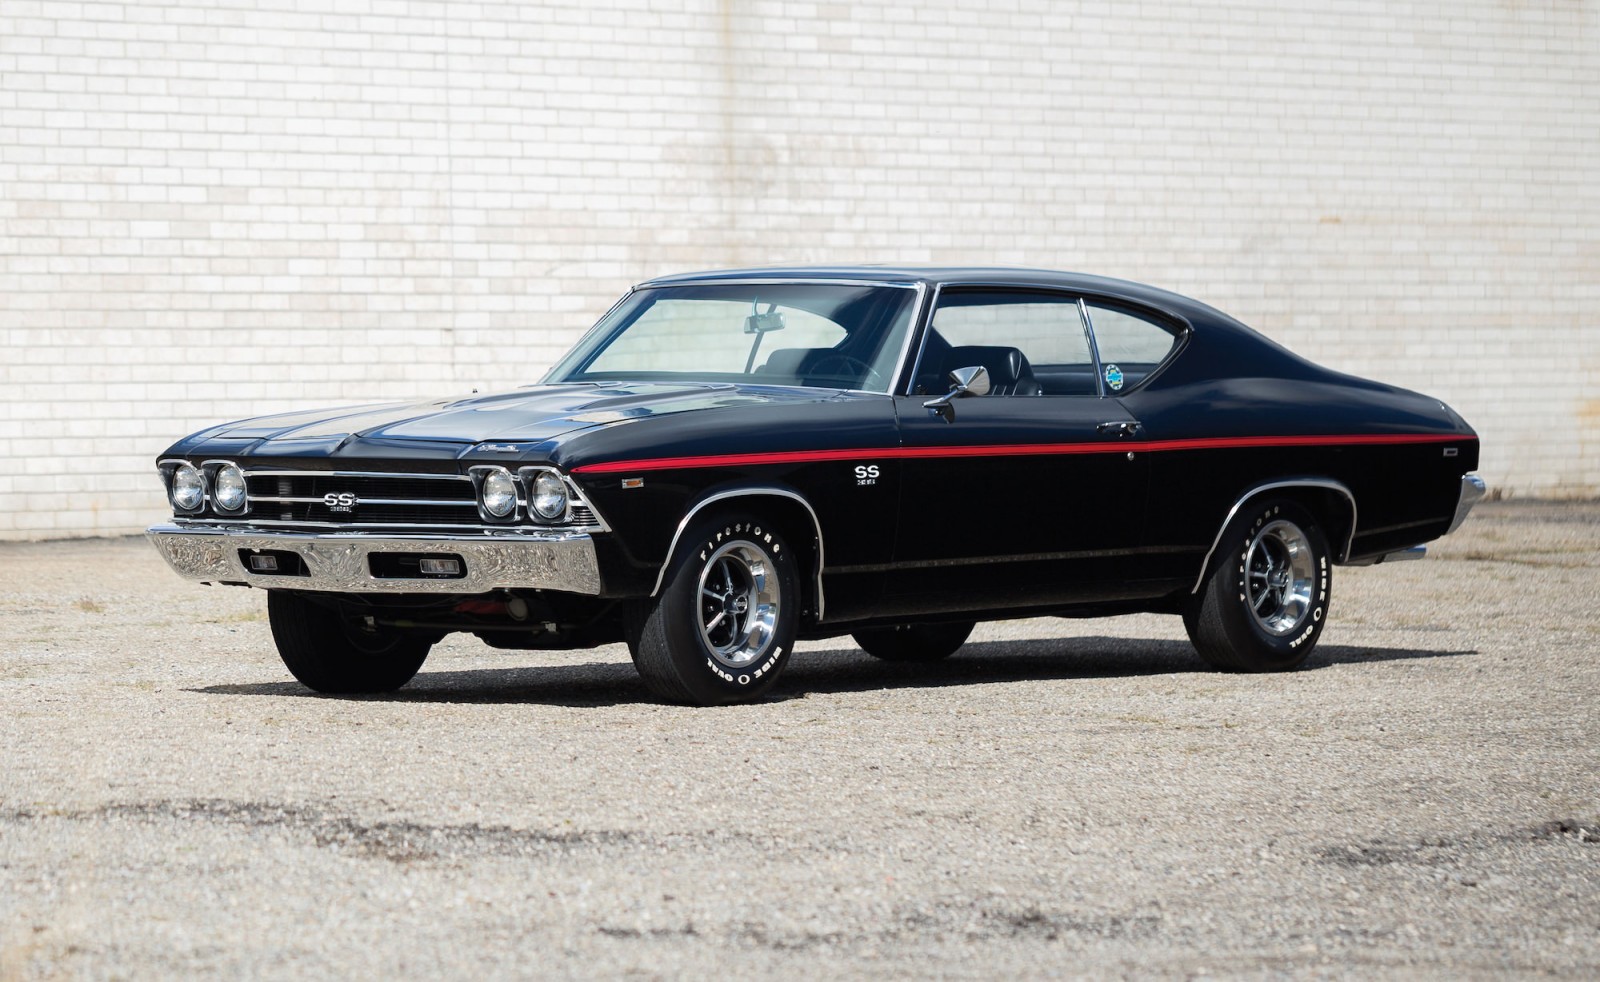 HQ Chevrolet Chevelle SS Wallpapers | File 316.23Kb